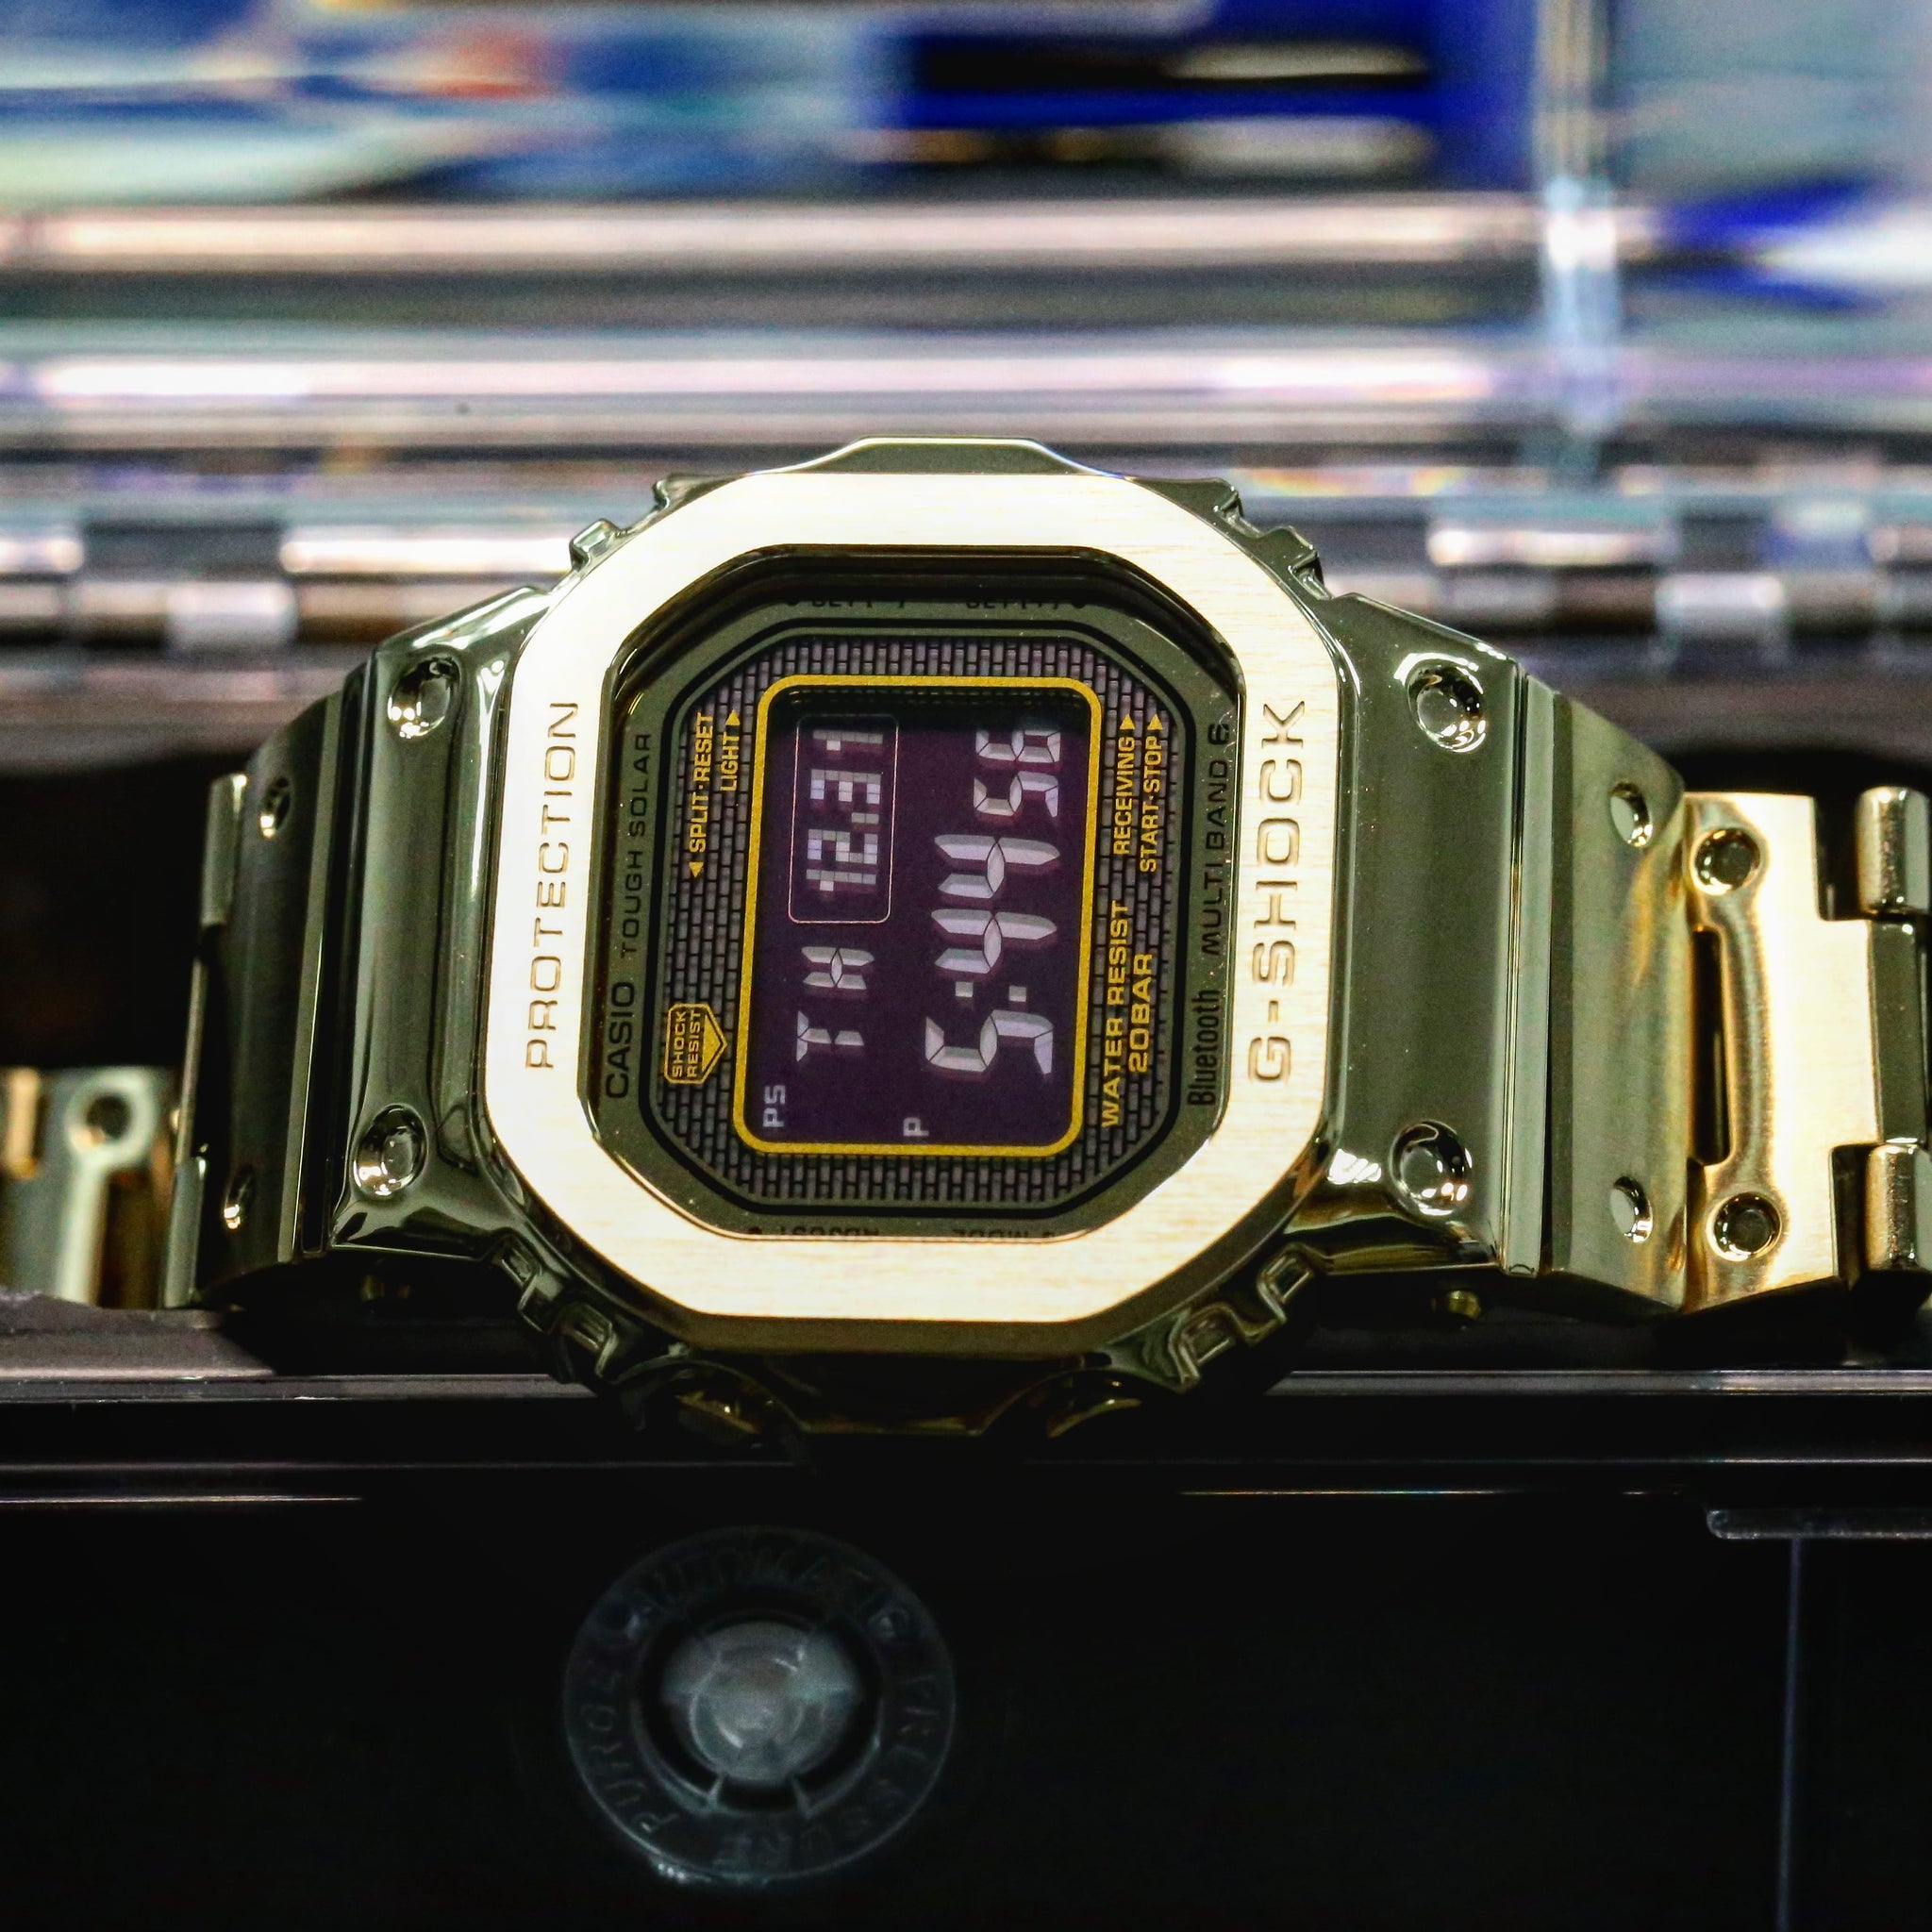 Casio G-Shock Full Metal Square Face Gold – WATCH